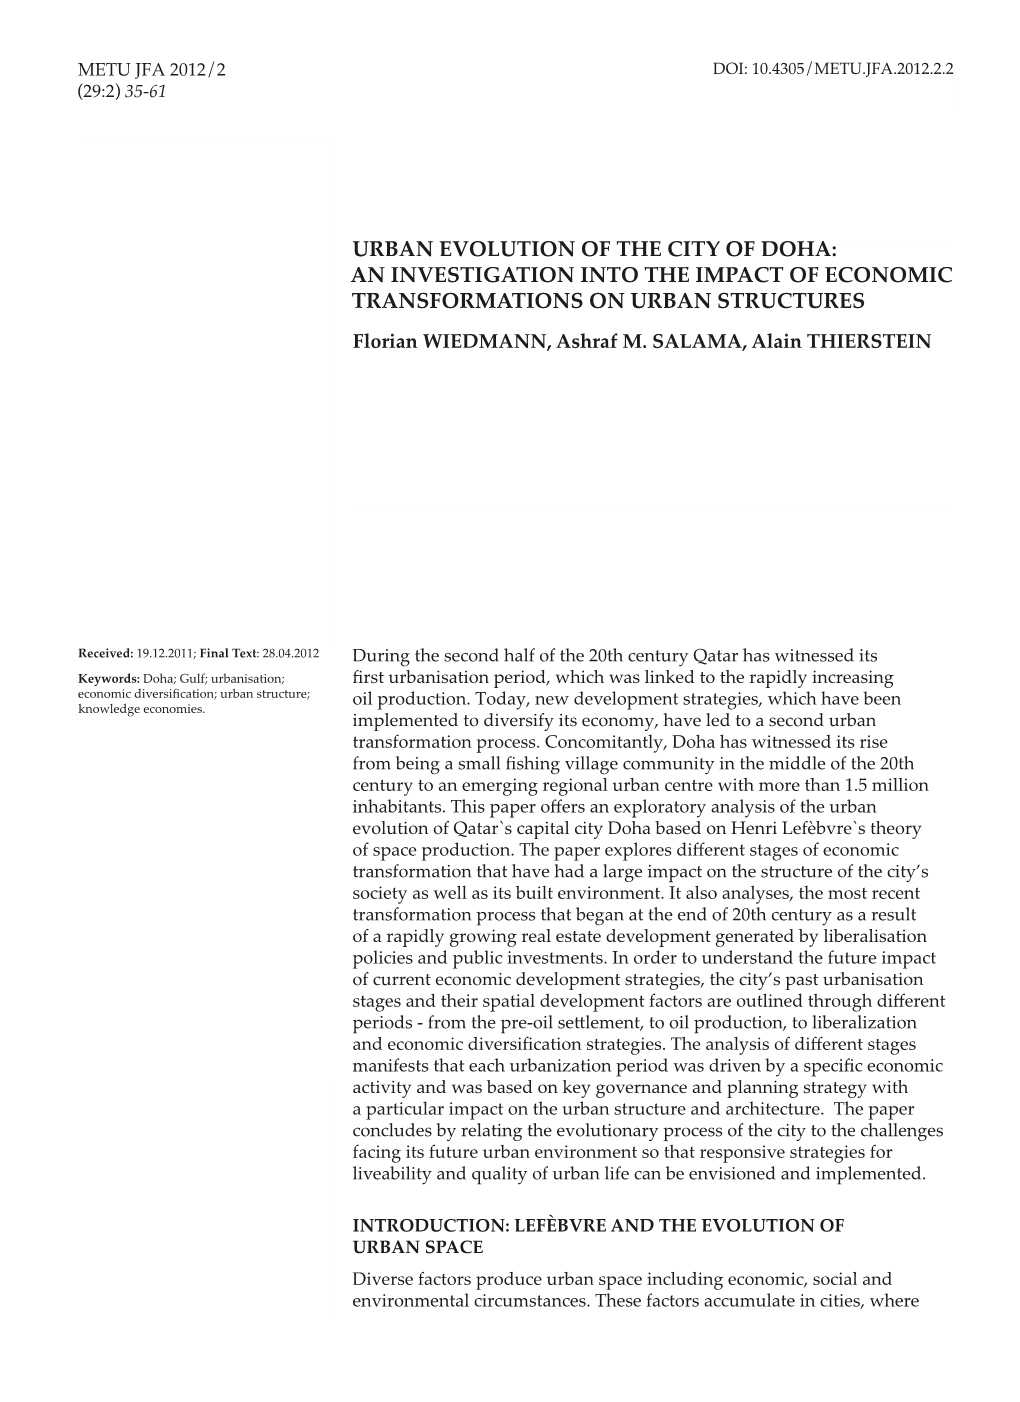 URBAN EVOLUTION of the CITY of DOHA: an INVESTIGATION INTO the IMPACT of ECONOMIC TRANSFORMATIONS on URBAN STRUCTURES Florian WIEDMANN, Ashraf M